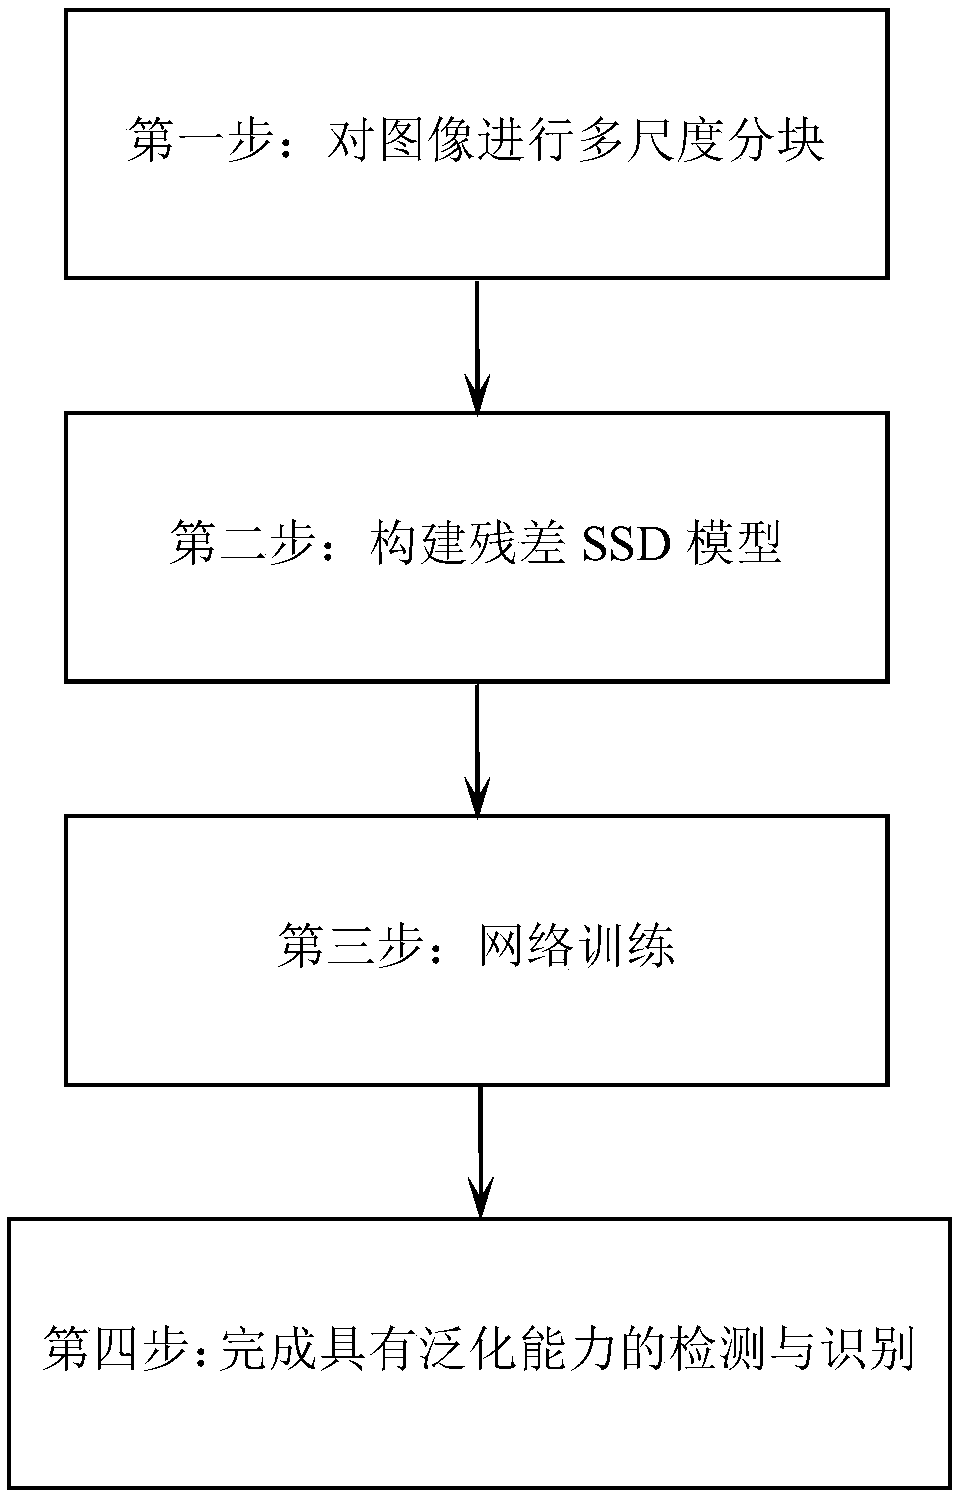 Residual SSD model-based traffic sign detection and recognition method